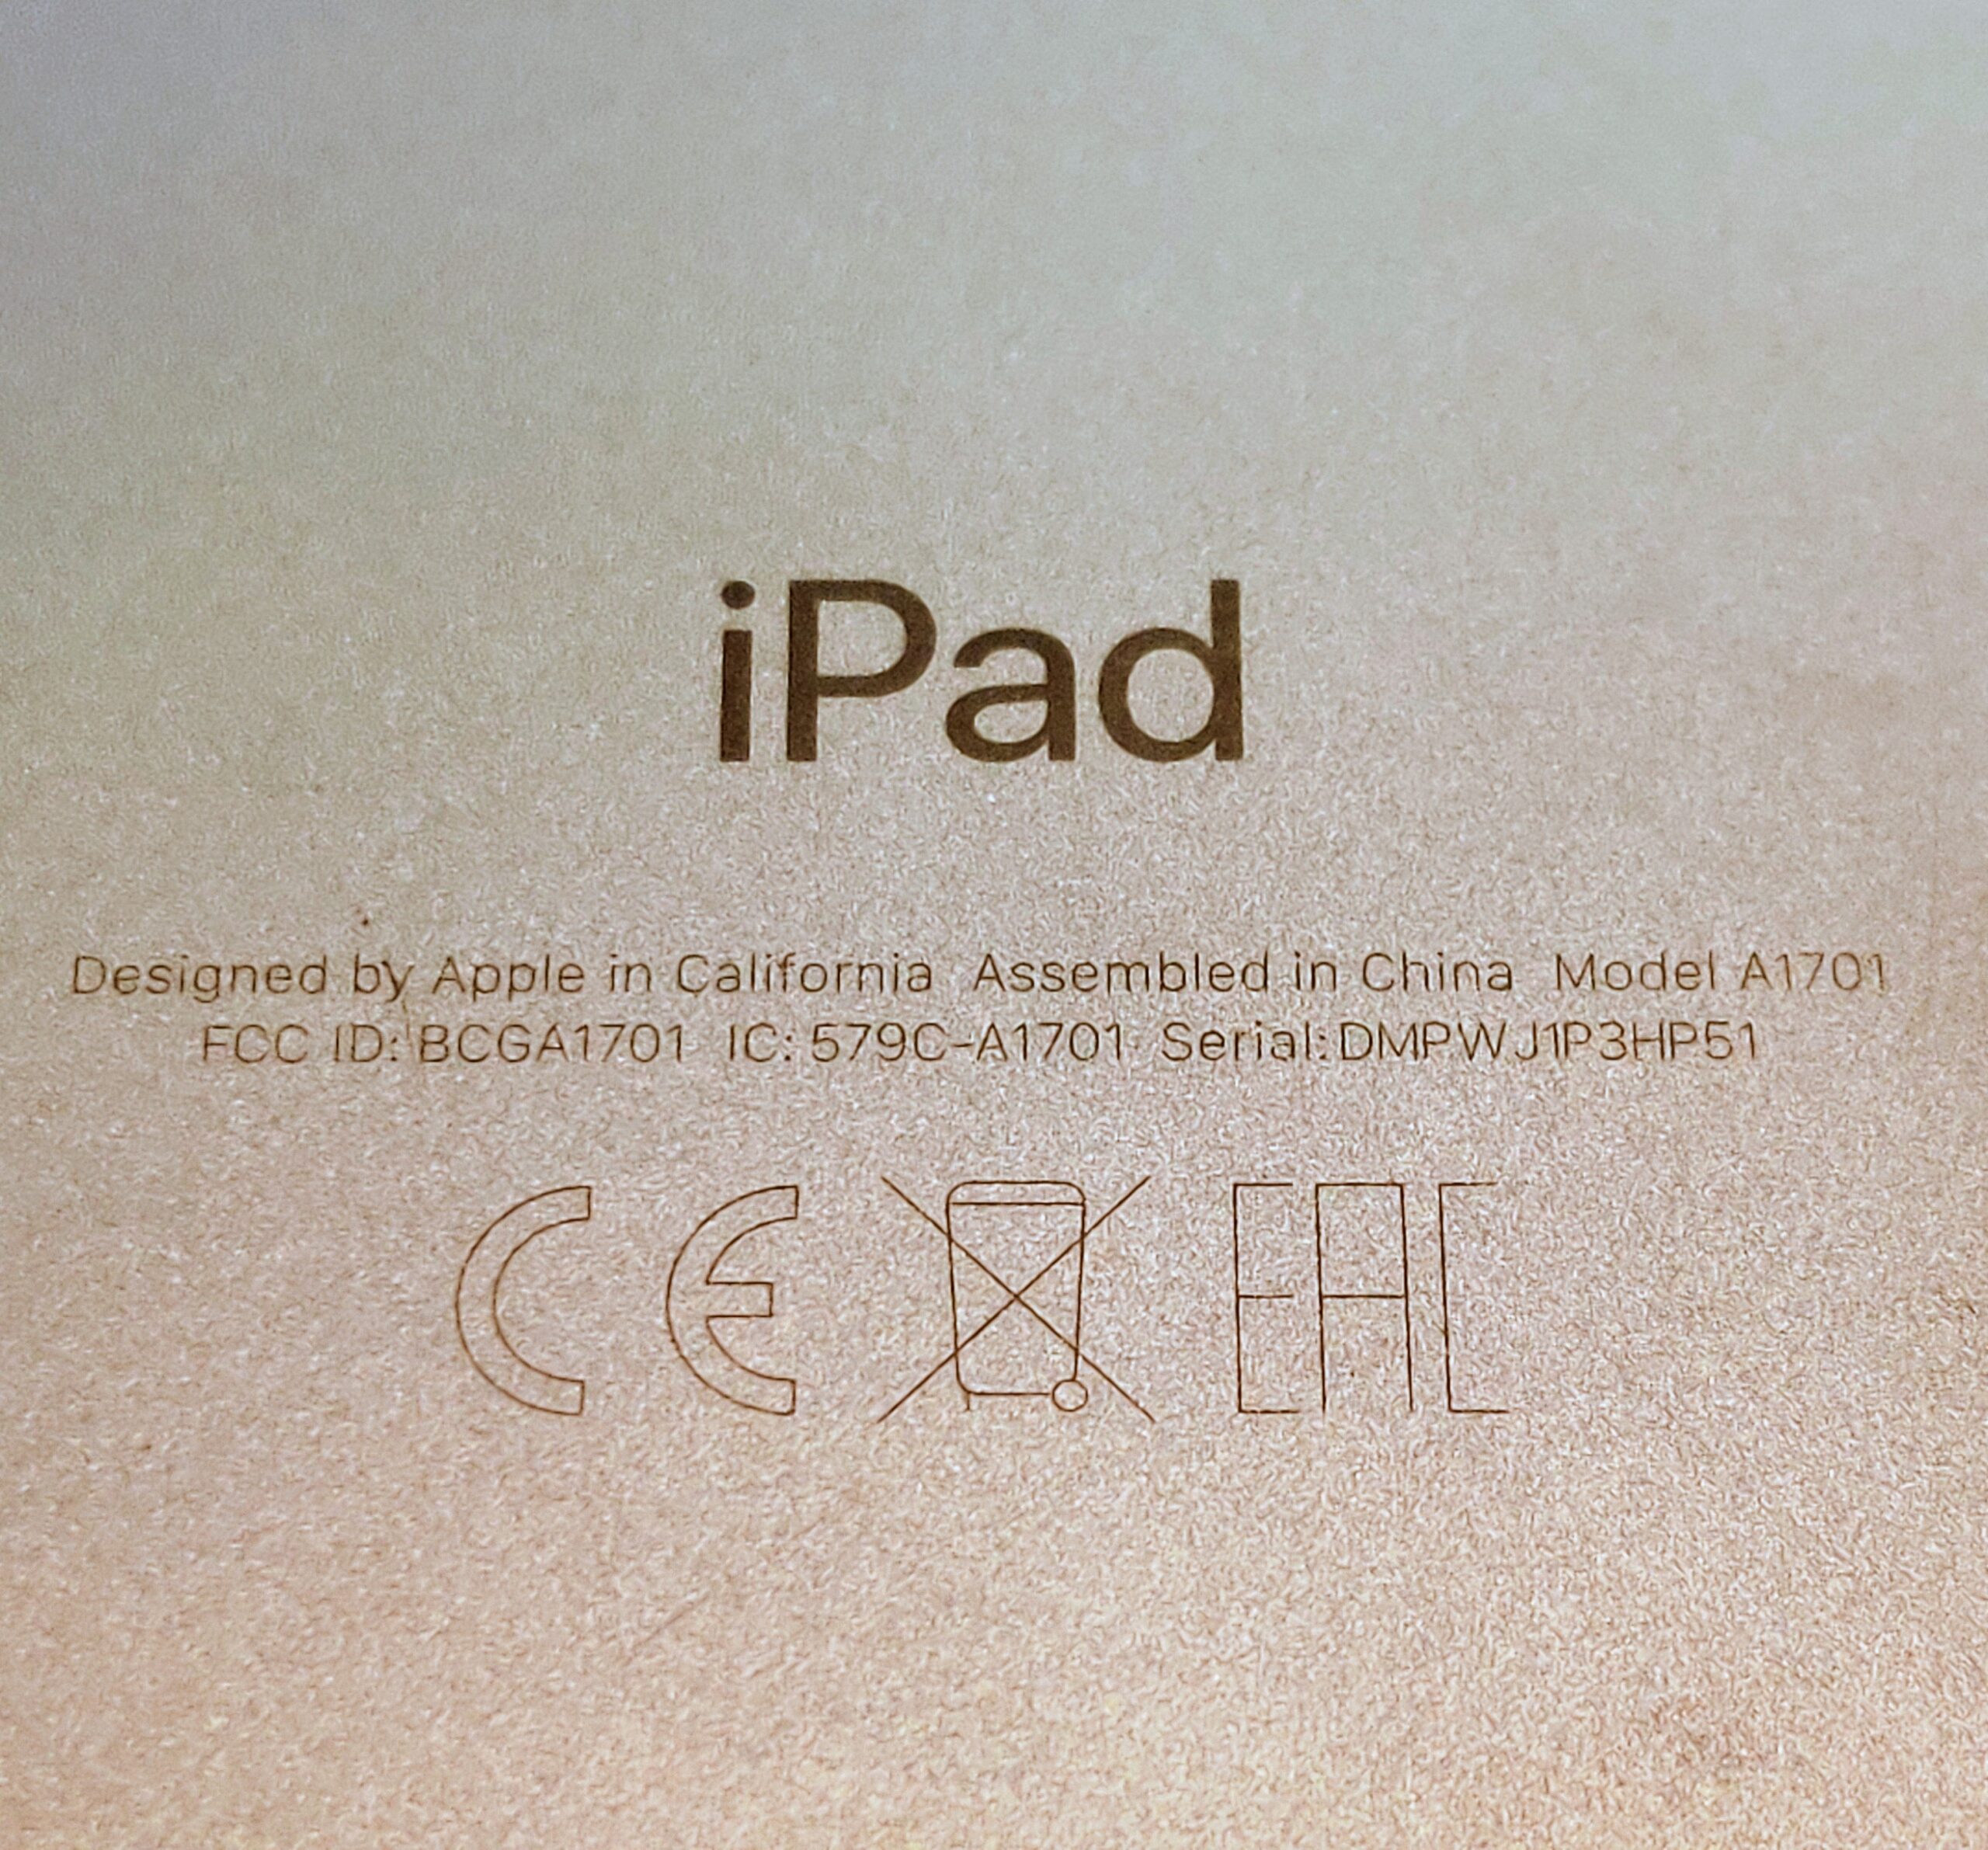 iPad text - designed in California - Assembled in China